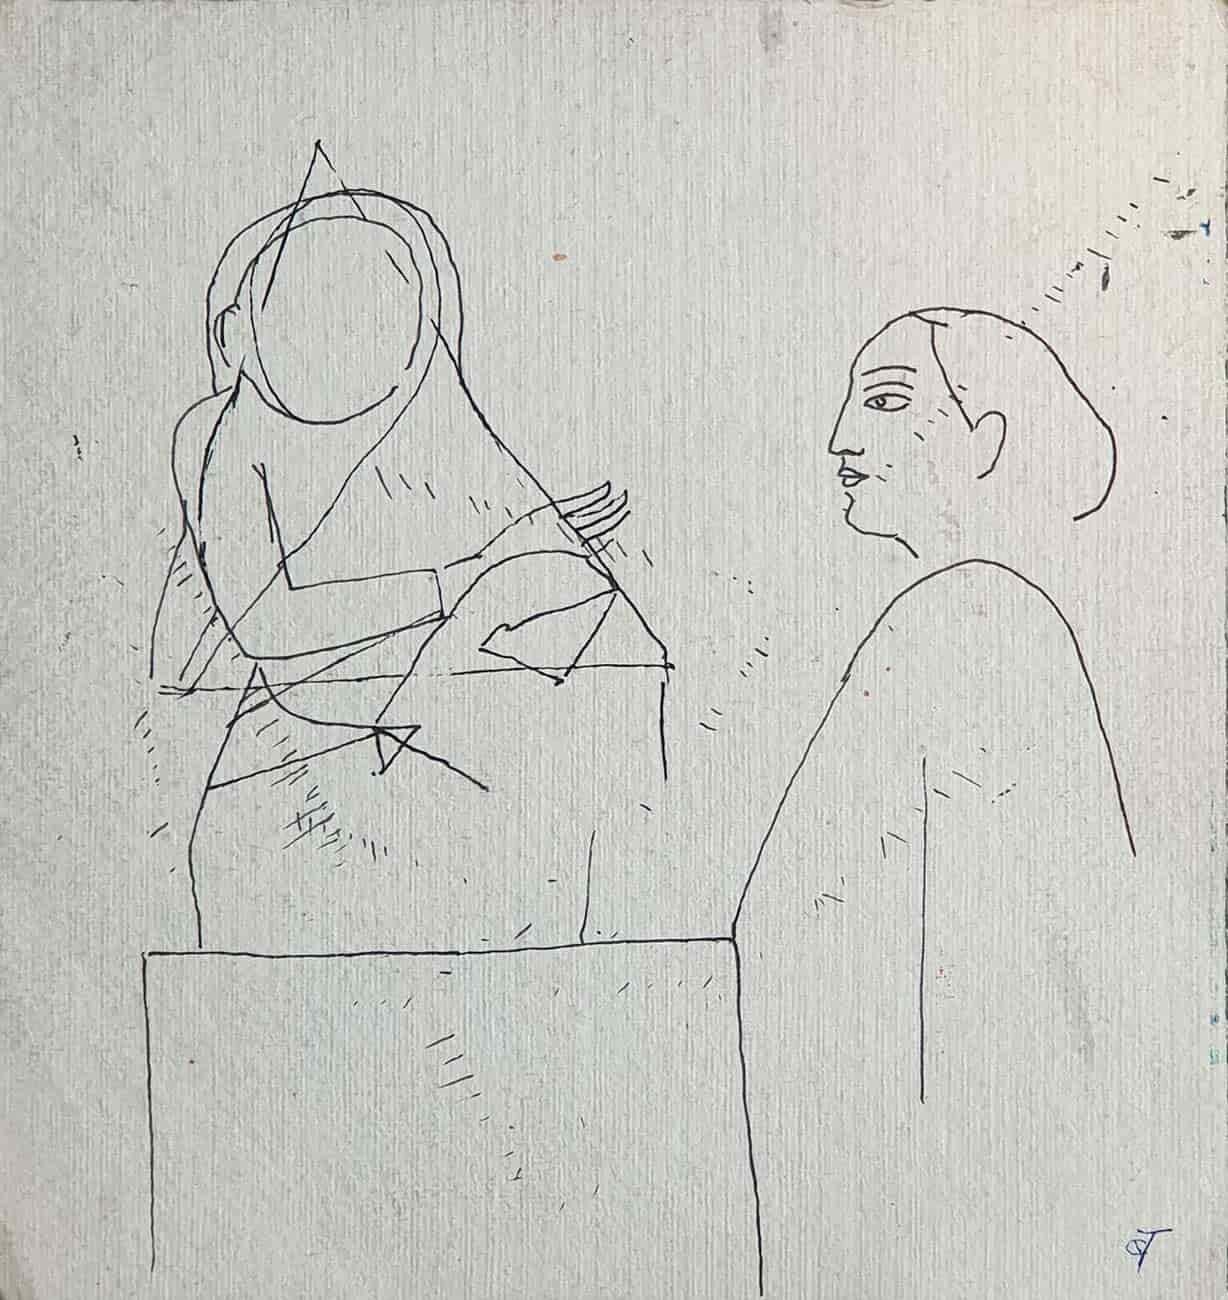 Sketch of Women, Drawing, Ink on paper by Modern Indian Artist "In Stock"